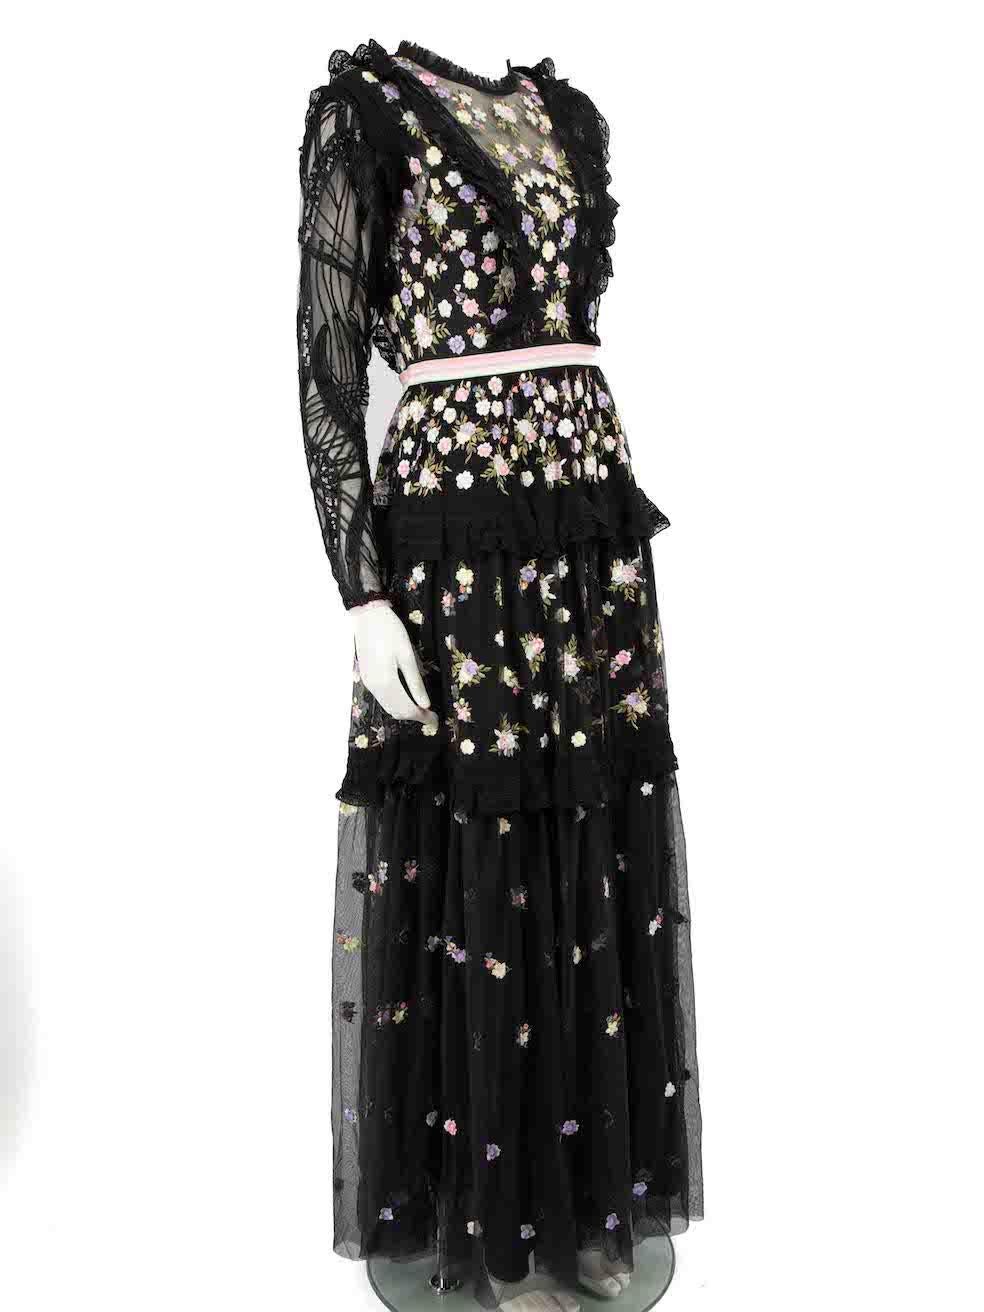 CONDITION is Very good. Minimal wear to dress is evident. Minimal wear to the front and back with loose threads to the embroidery on this used Needle & Thread designer resale item.
 
 
 
 Details
 
 
 Black
 
 Synthetic
 
 Maxi dress
 
 Floral